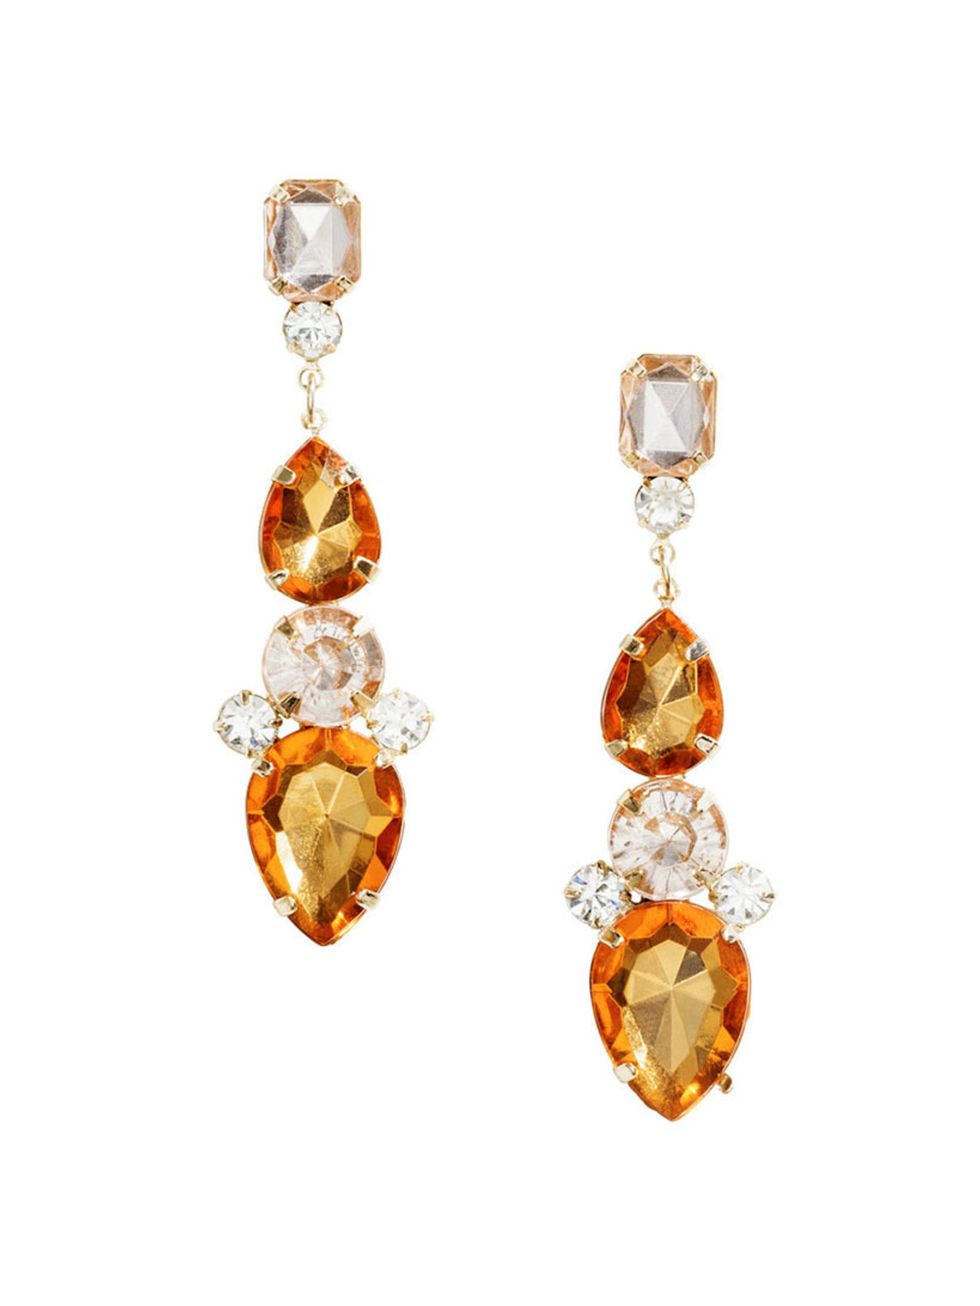 <p>Amber alert.</p>

<p>Sparkly stone earrings, £3.99, from <a href="http://www.hm.com/gb/product/40564?article=40564-A" target="_blank">H&M</a>.</p>